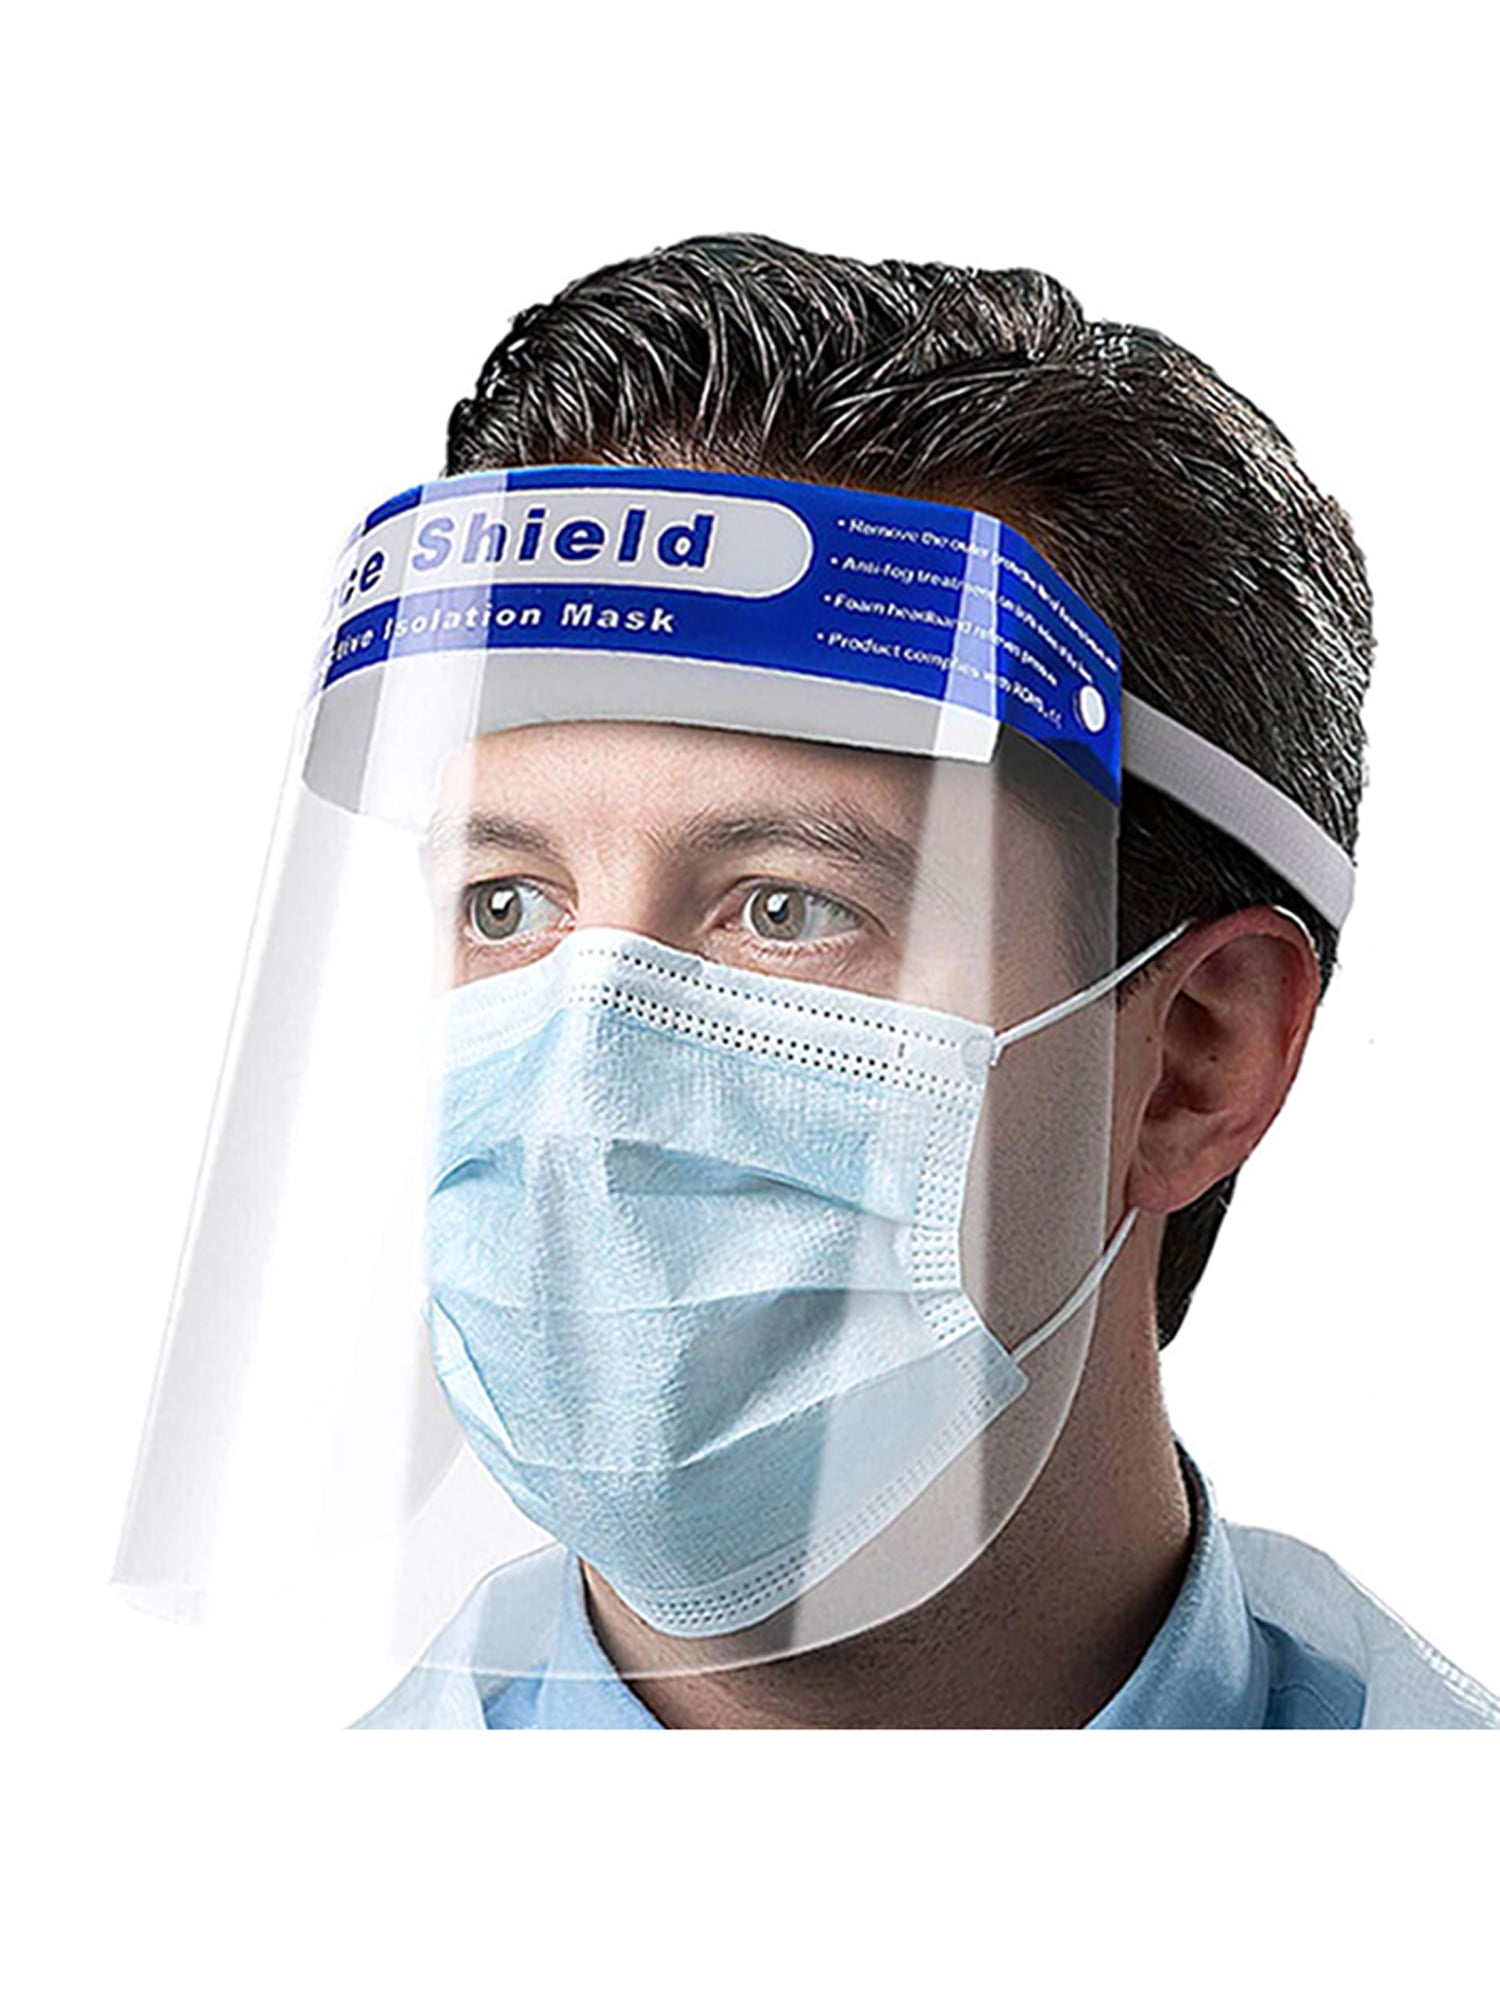 Safety Full Face Shield Guard Protector Mask Clear+Head Band Elastic Reusable US 